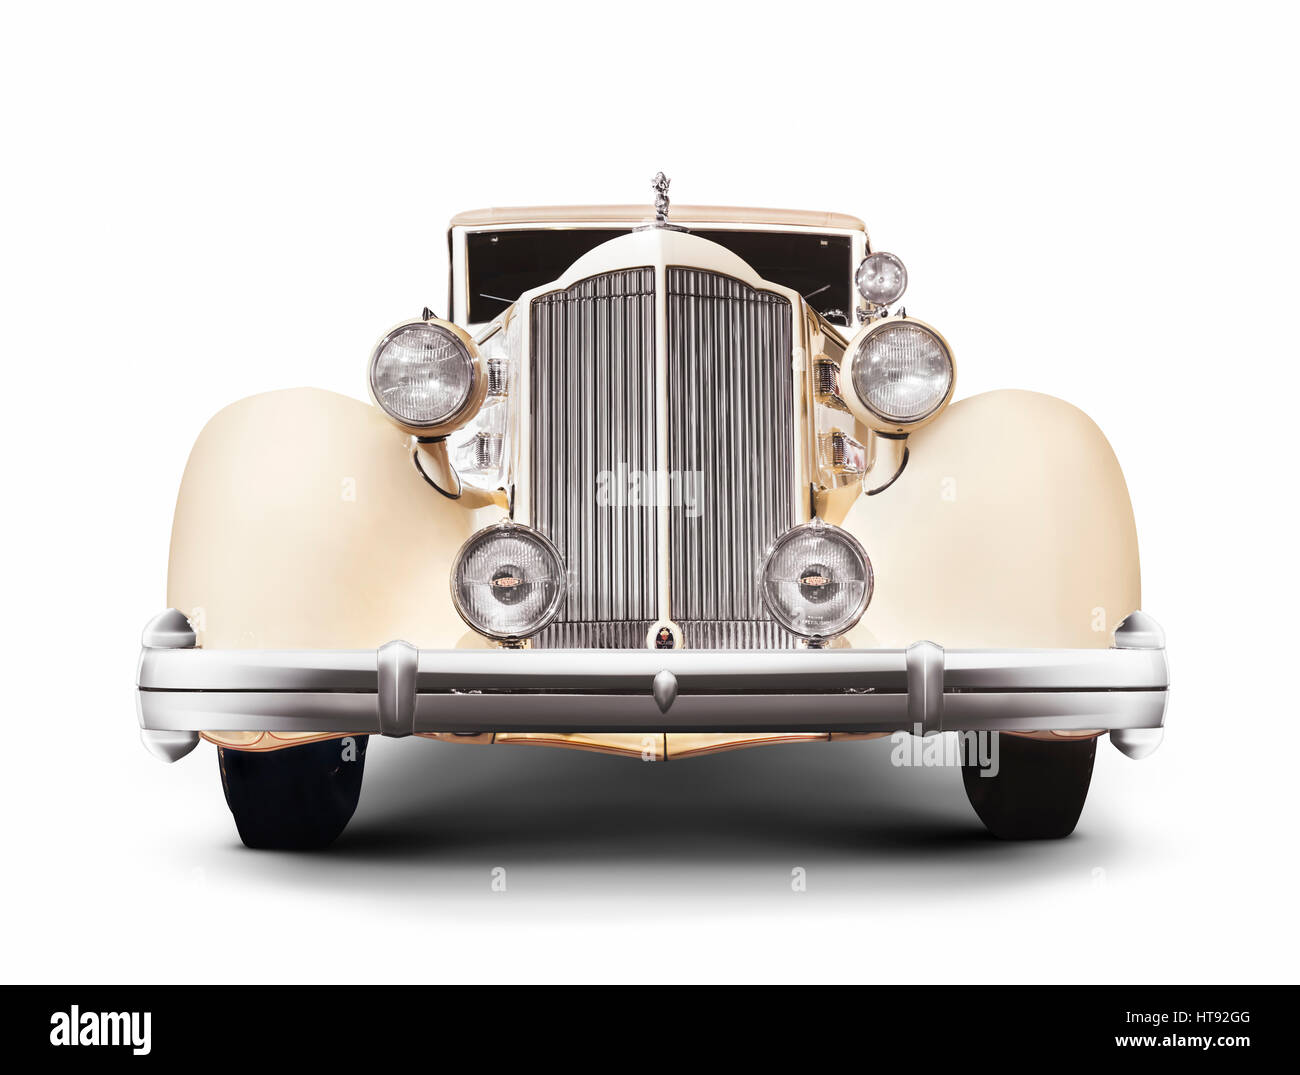 License and prints at MaximImages.com - 1935 Packard Twelve coupe roadster classic vintage luxury car front view isolated on white background Stock Photo